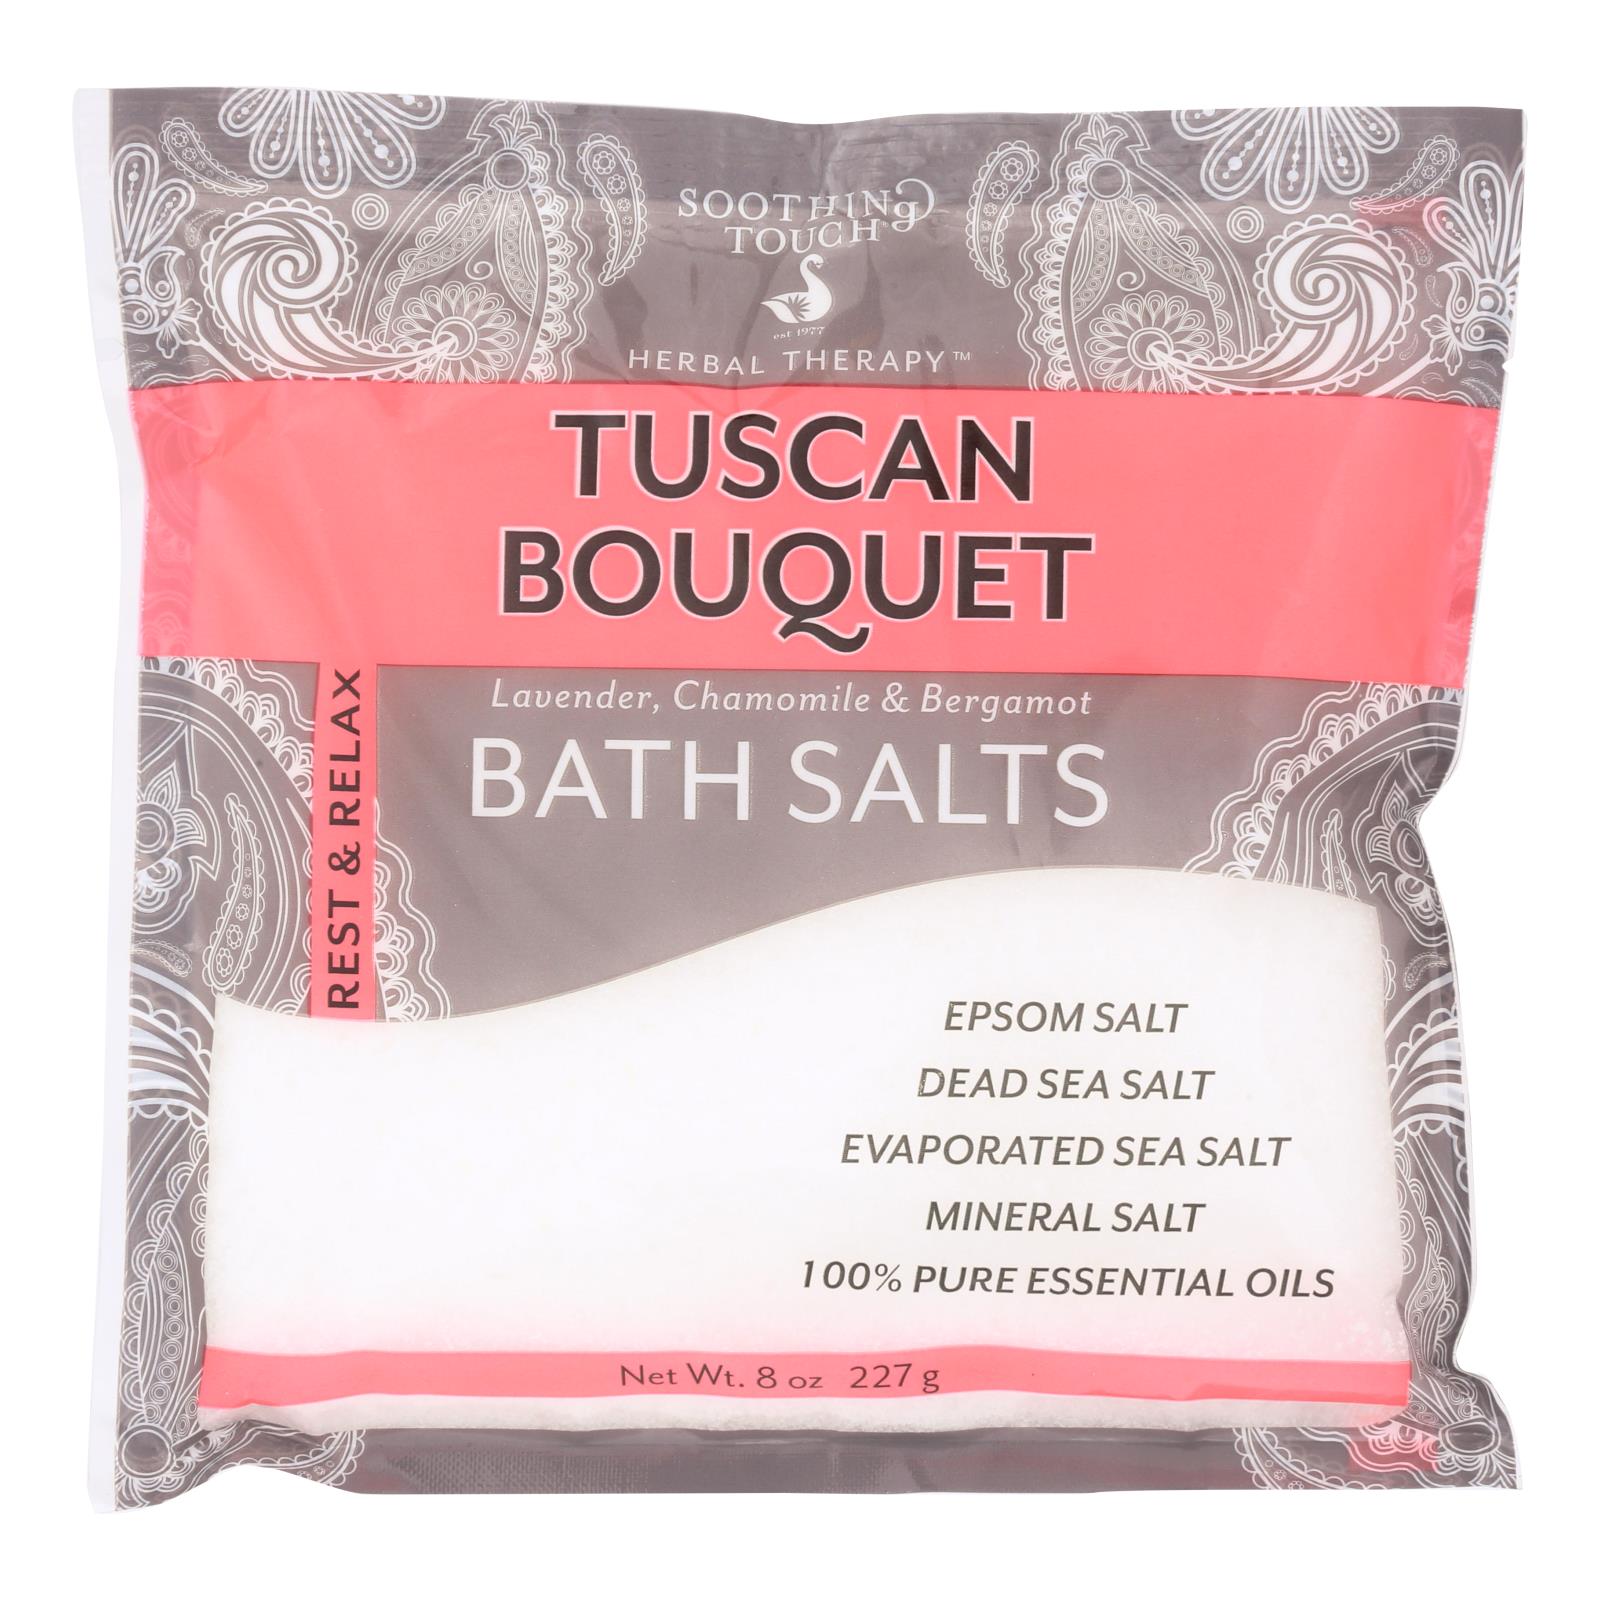 Soothing Touch Bath Salts - Tuscan Bouquet - 6개 묶음상품 - 8 oz